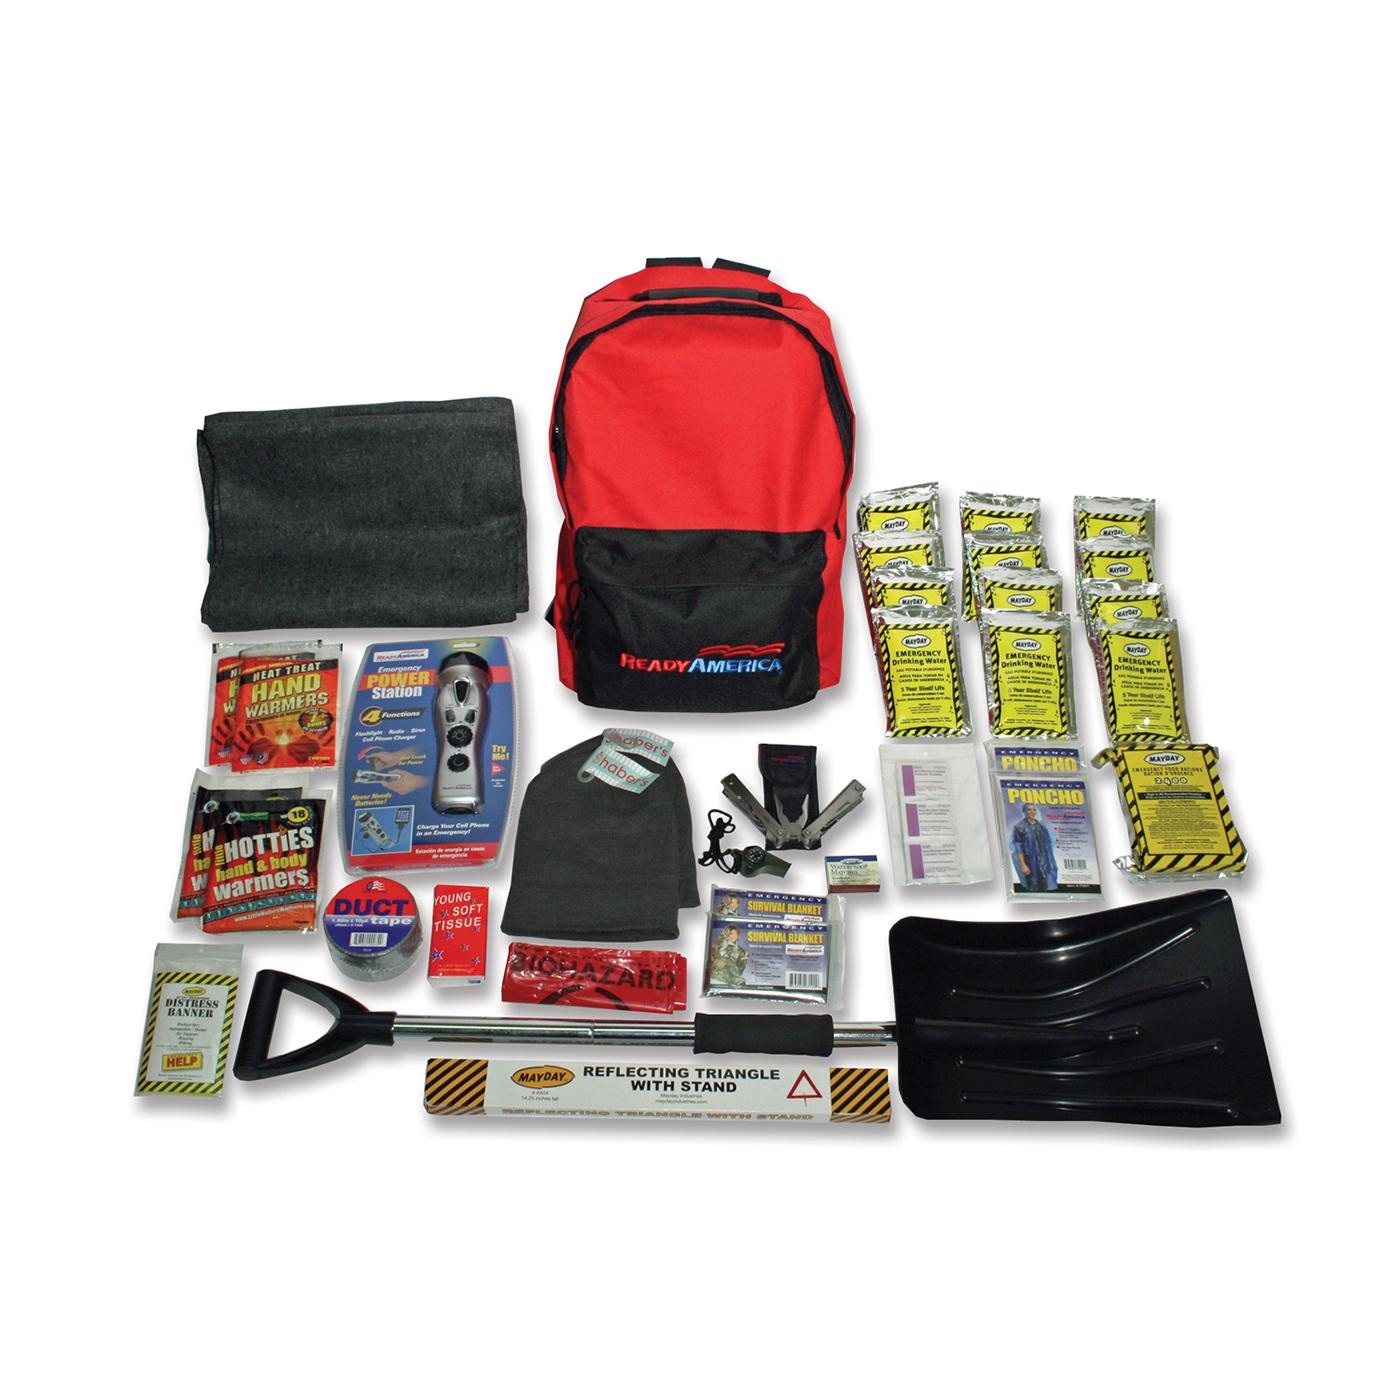 Amazon.com: Pre-Packed Emergency Survival Kit/Bug Out Bag for 2 - Over 150  Total Pieces of Disaster Preparedness Supplies for Hurricanes, Floods,  Earth Quakes & Other Disasters (Black) : Sports & Outdoors